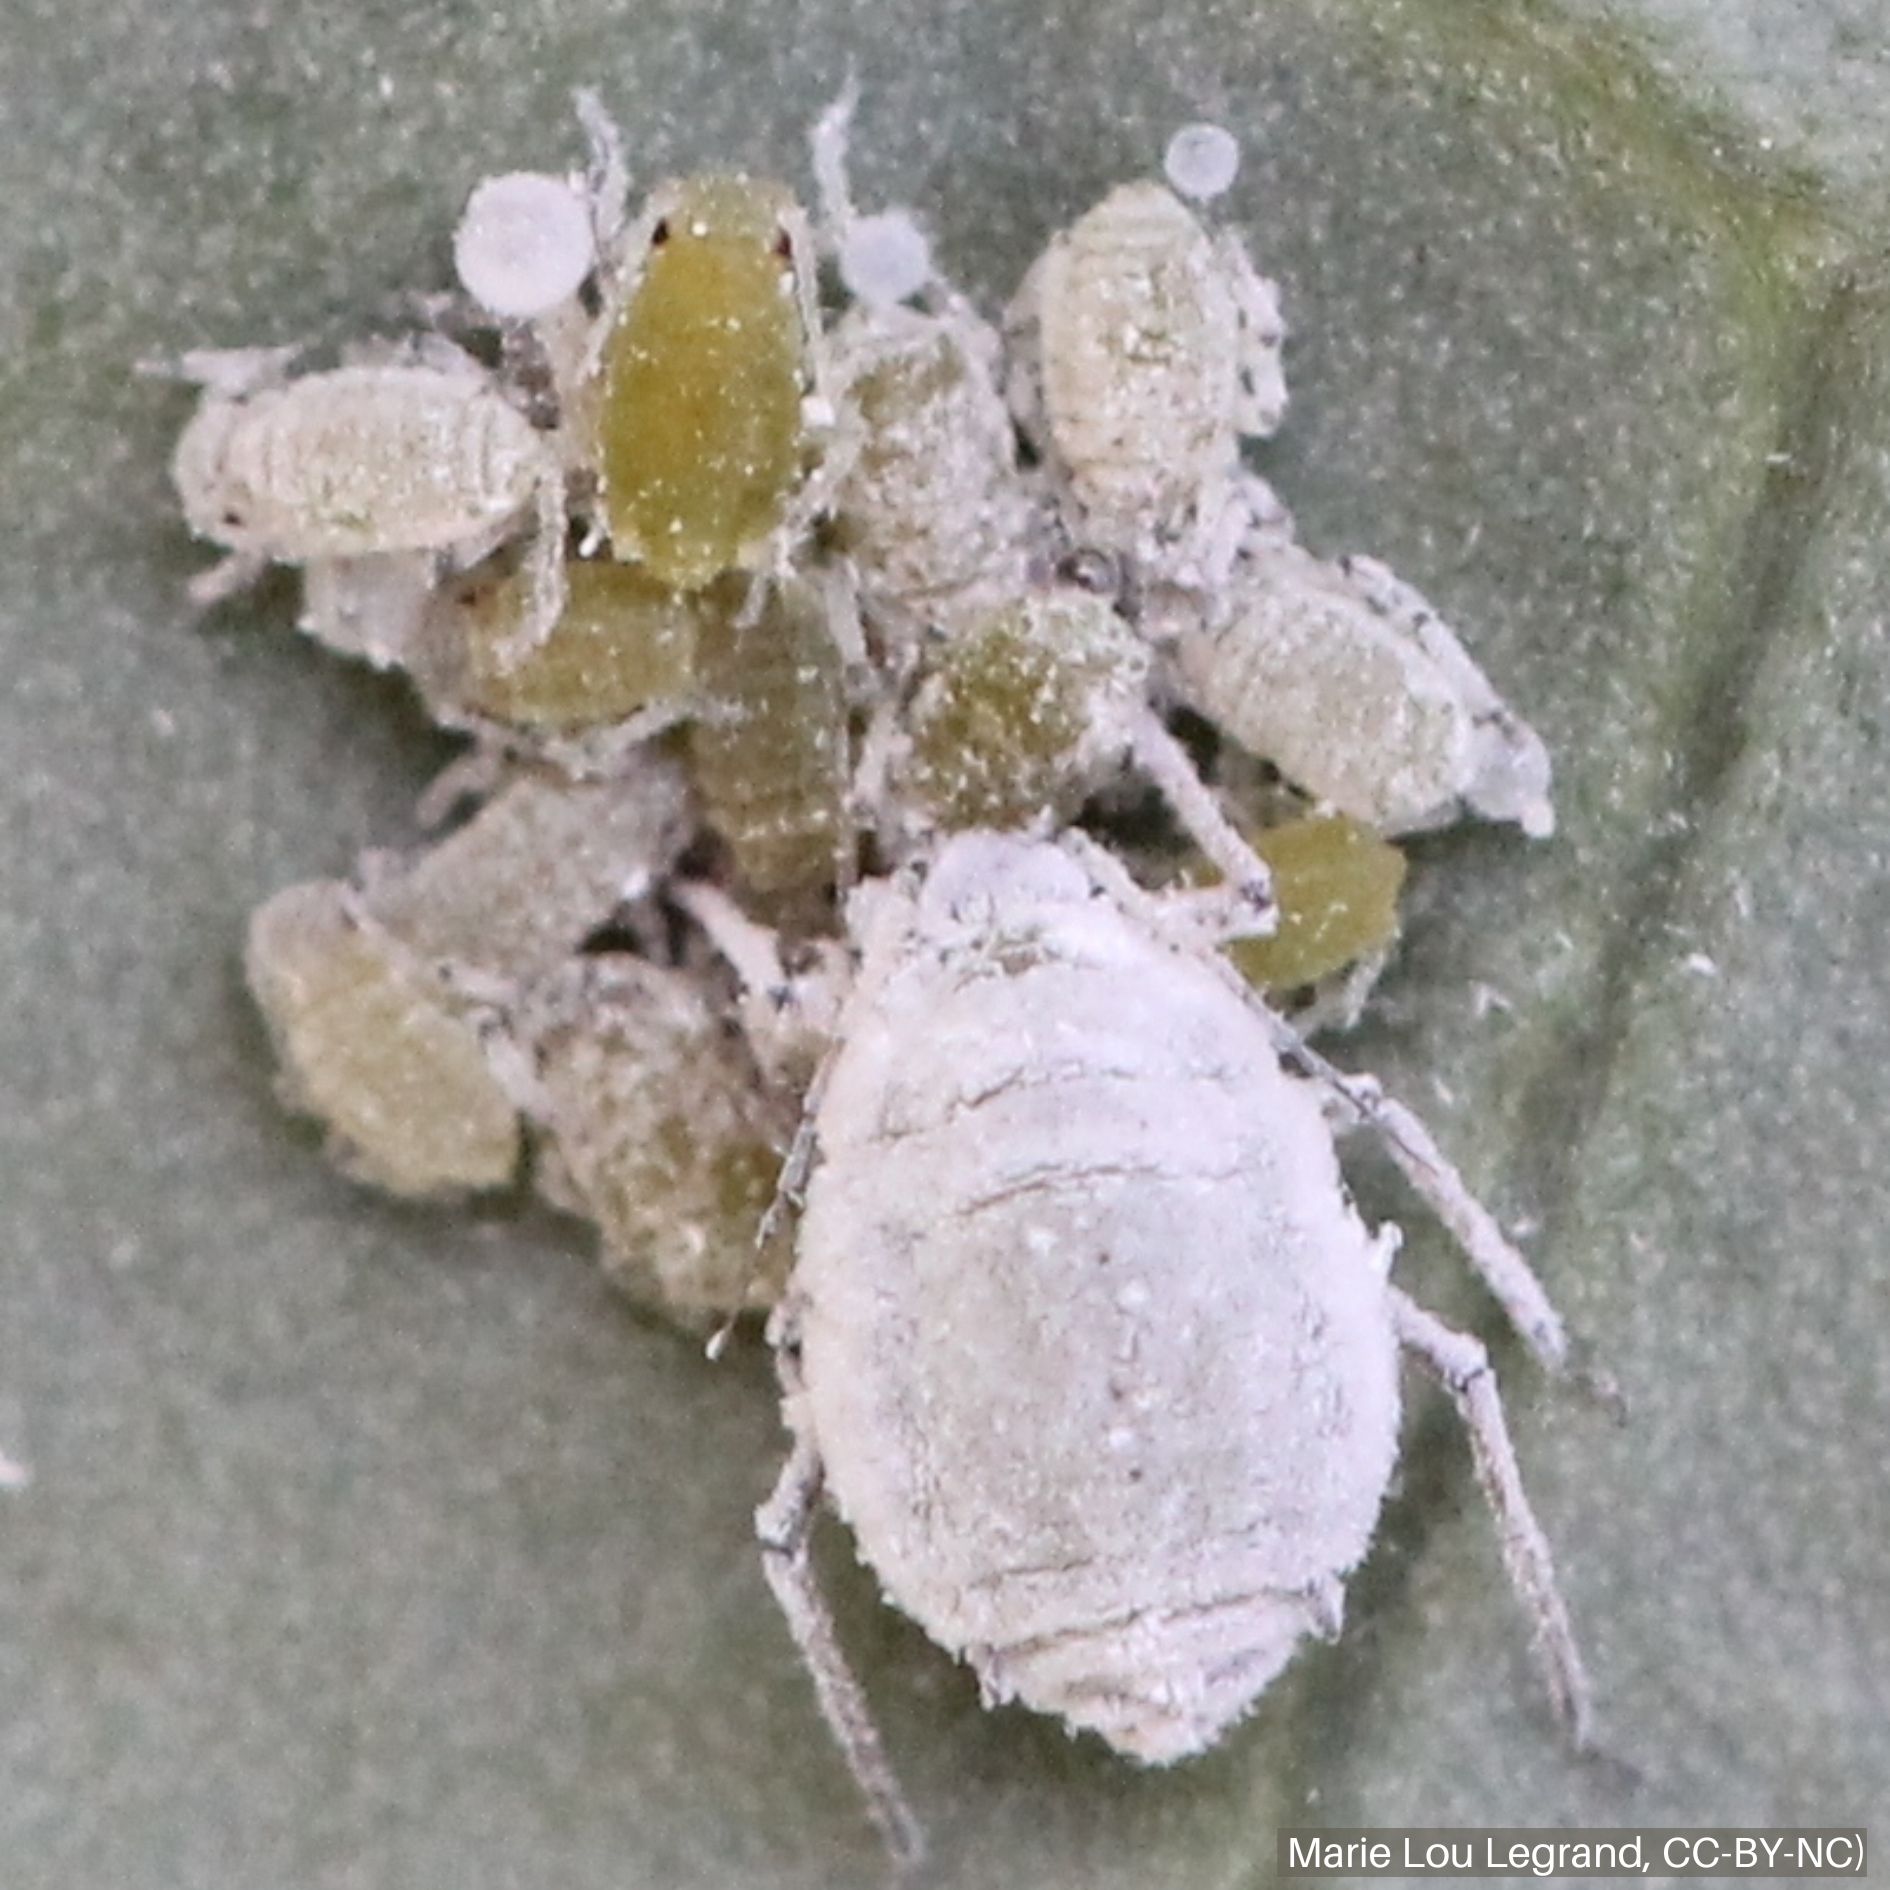 Cabbage aphids are one species of aphid known to carry TMV